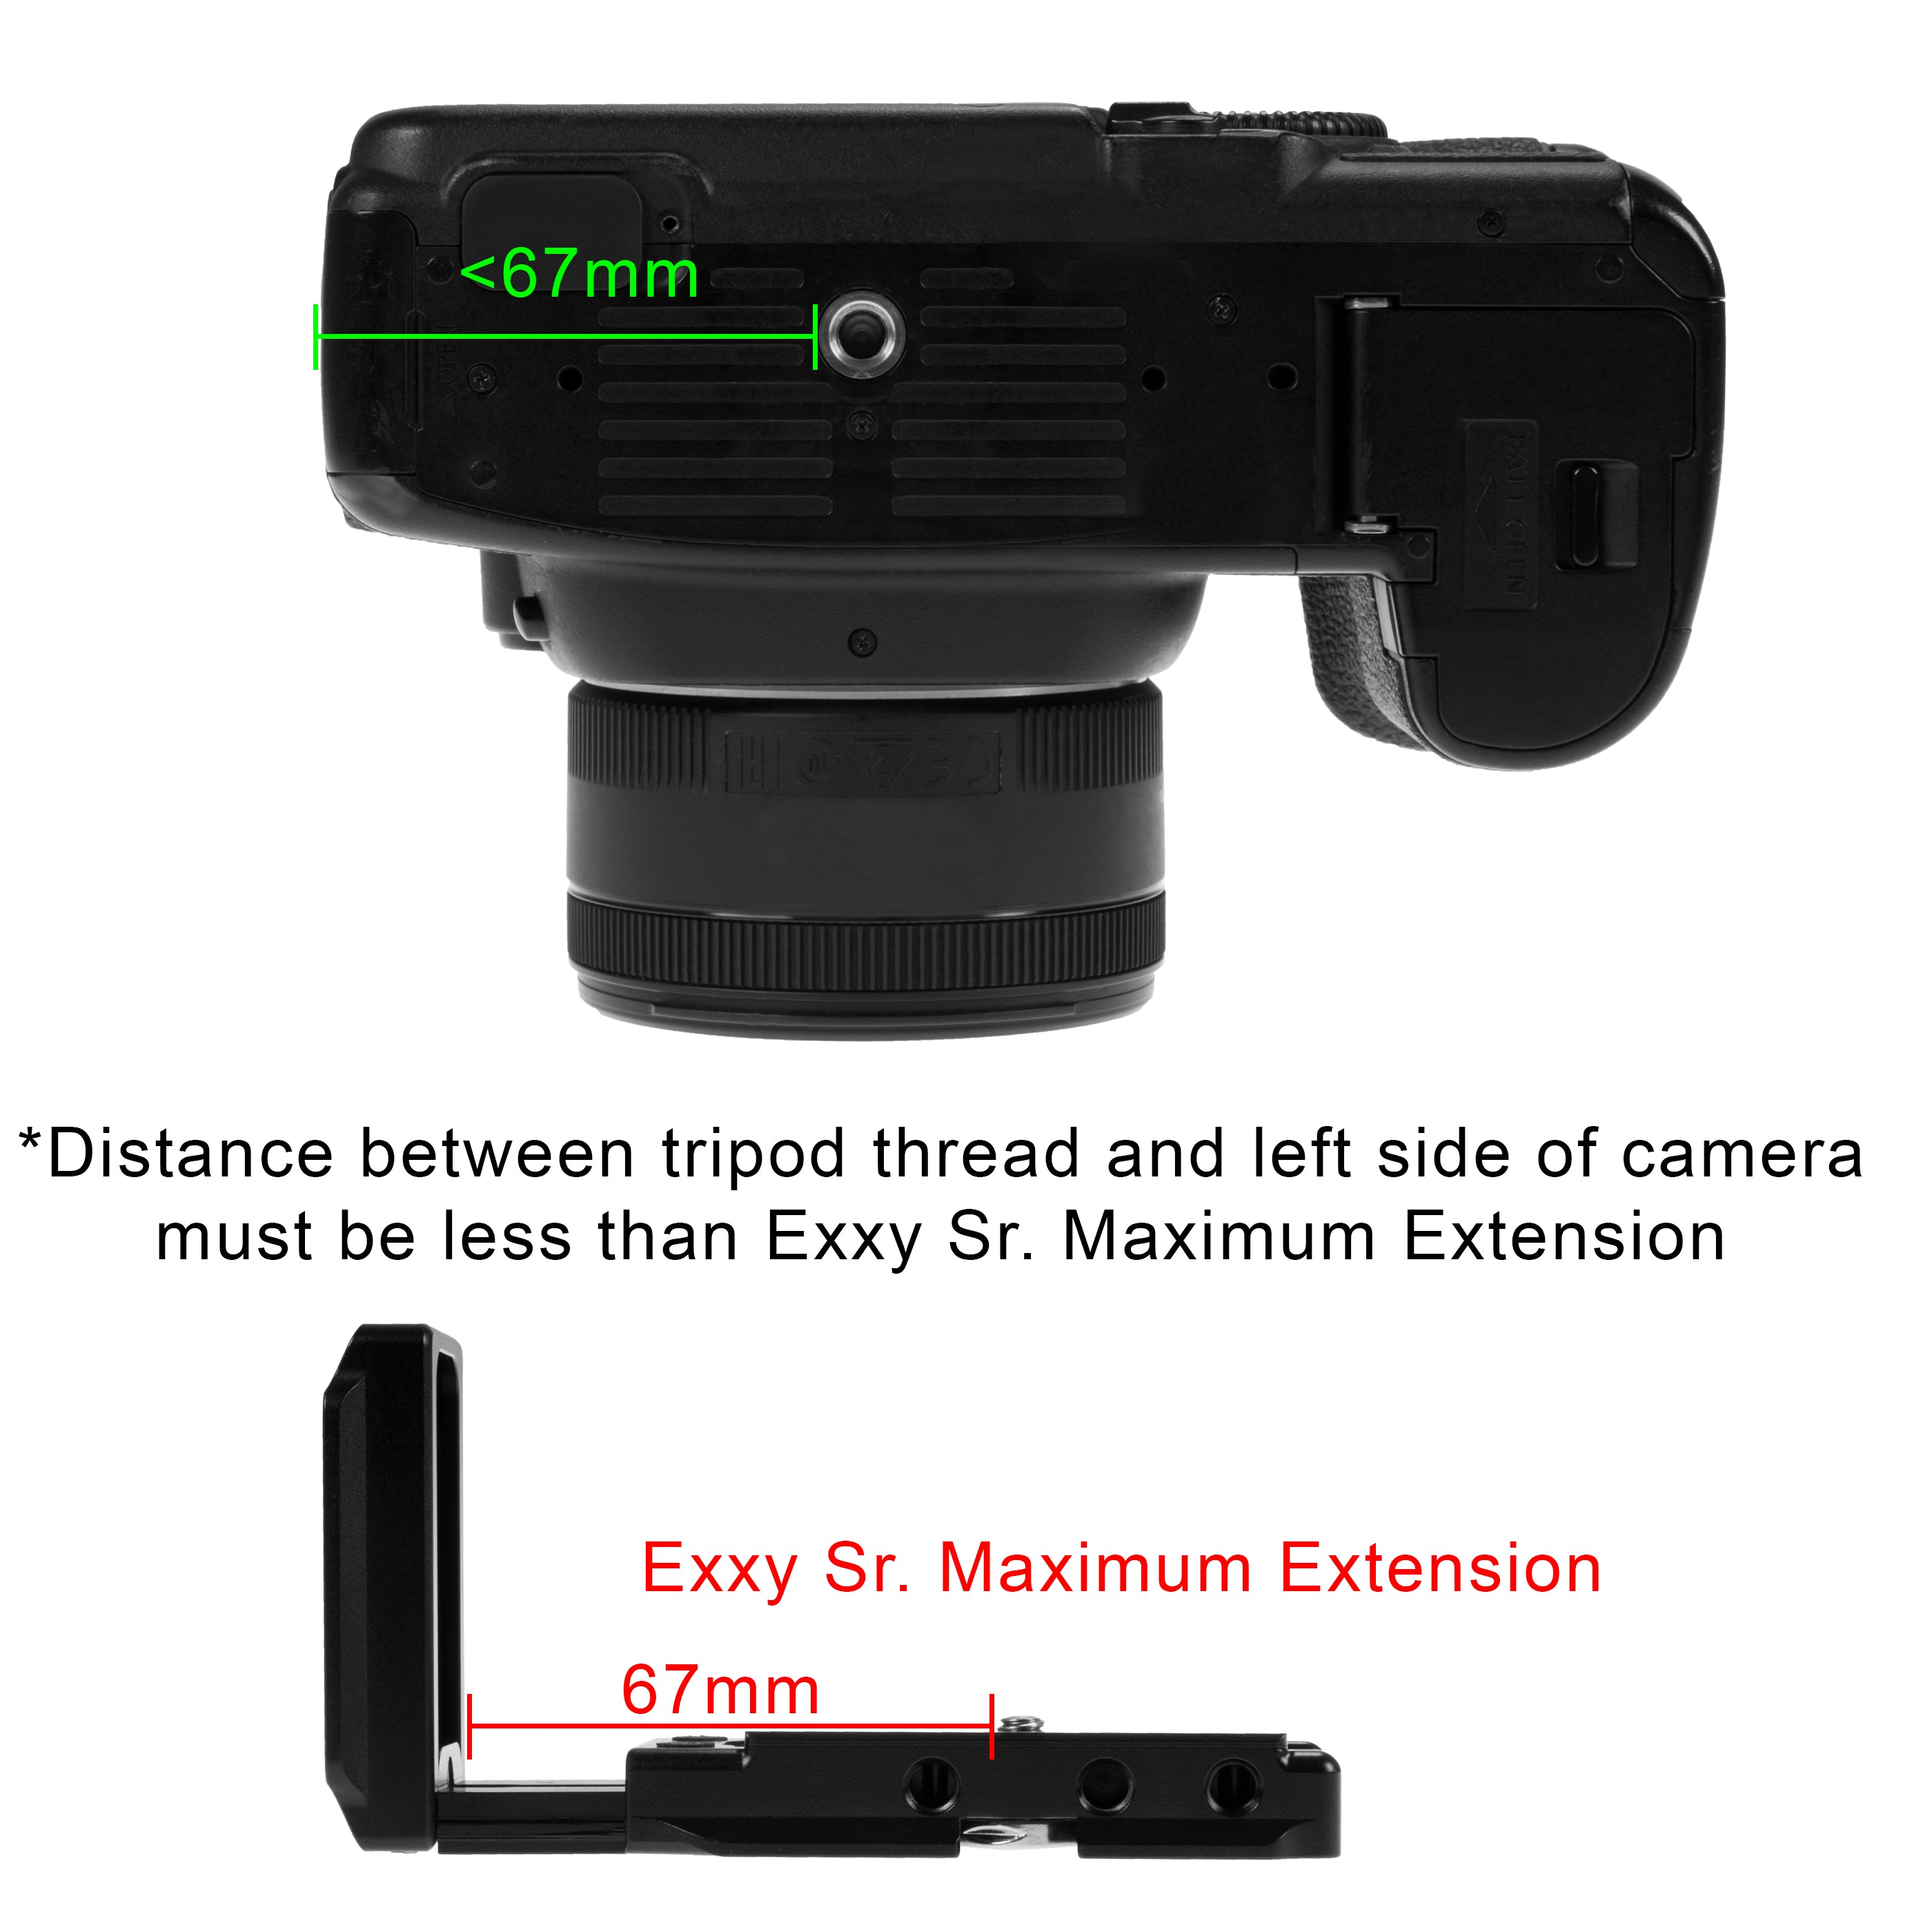 Exxy Omni Sr. Universal L-Bracket for Most DSLR Cameras - All Metal Black Camera Hand Grip for Acra Swiss or Arca Swiss-Type Quick Releases